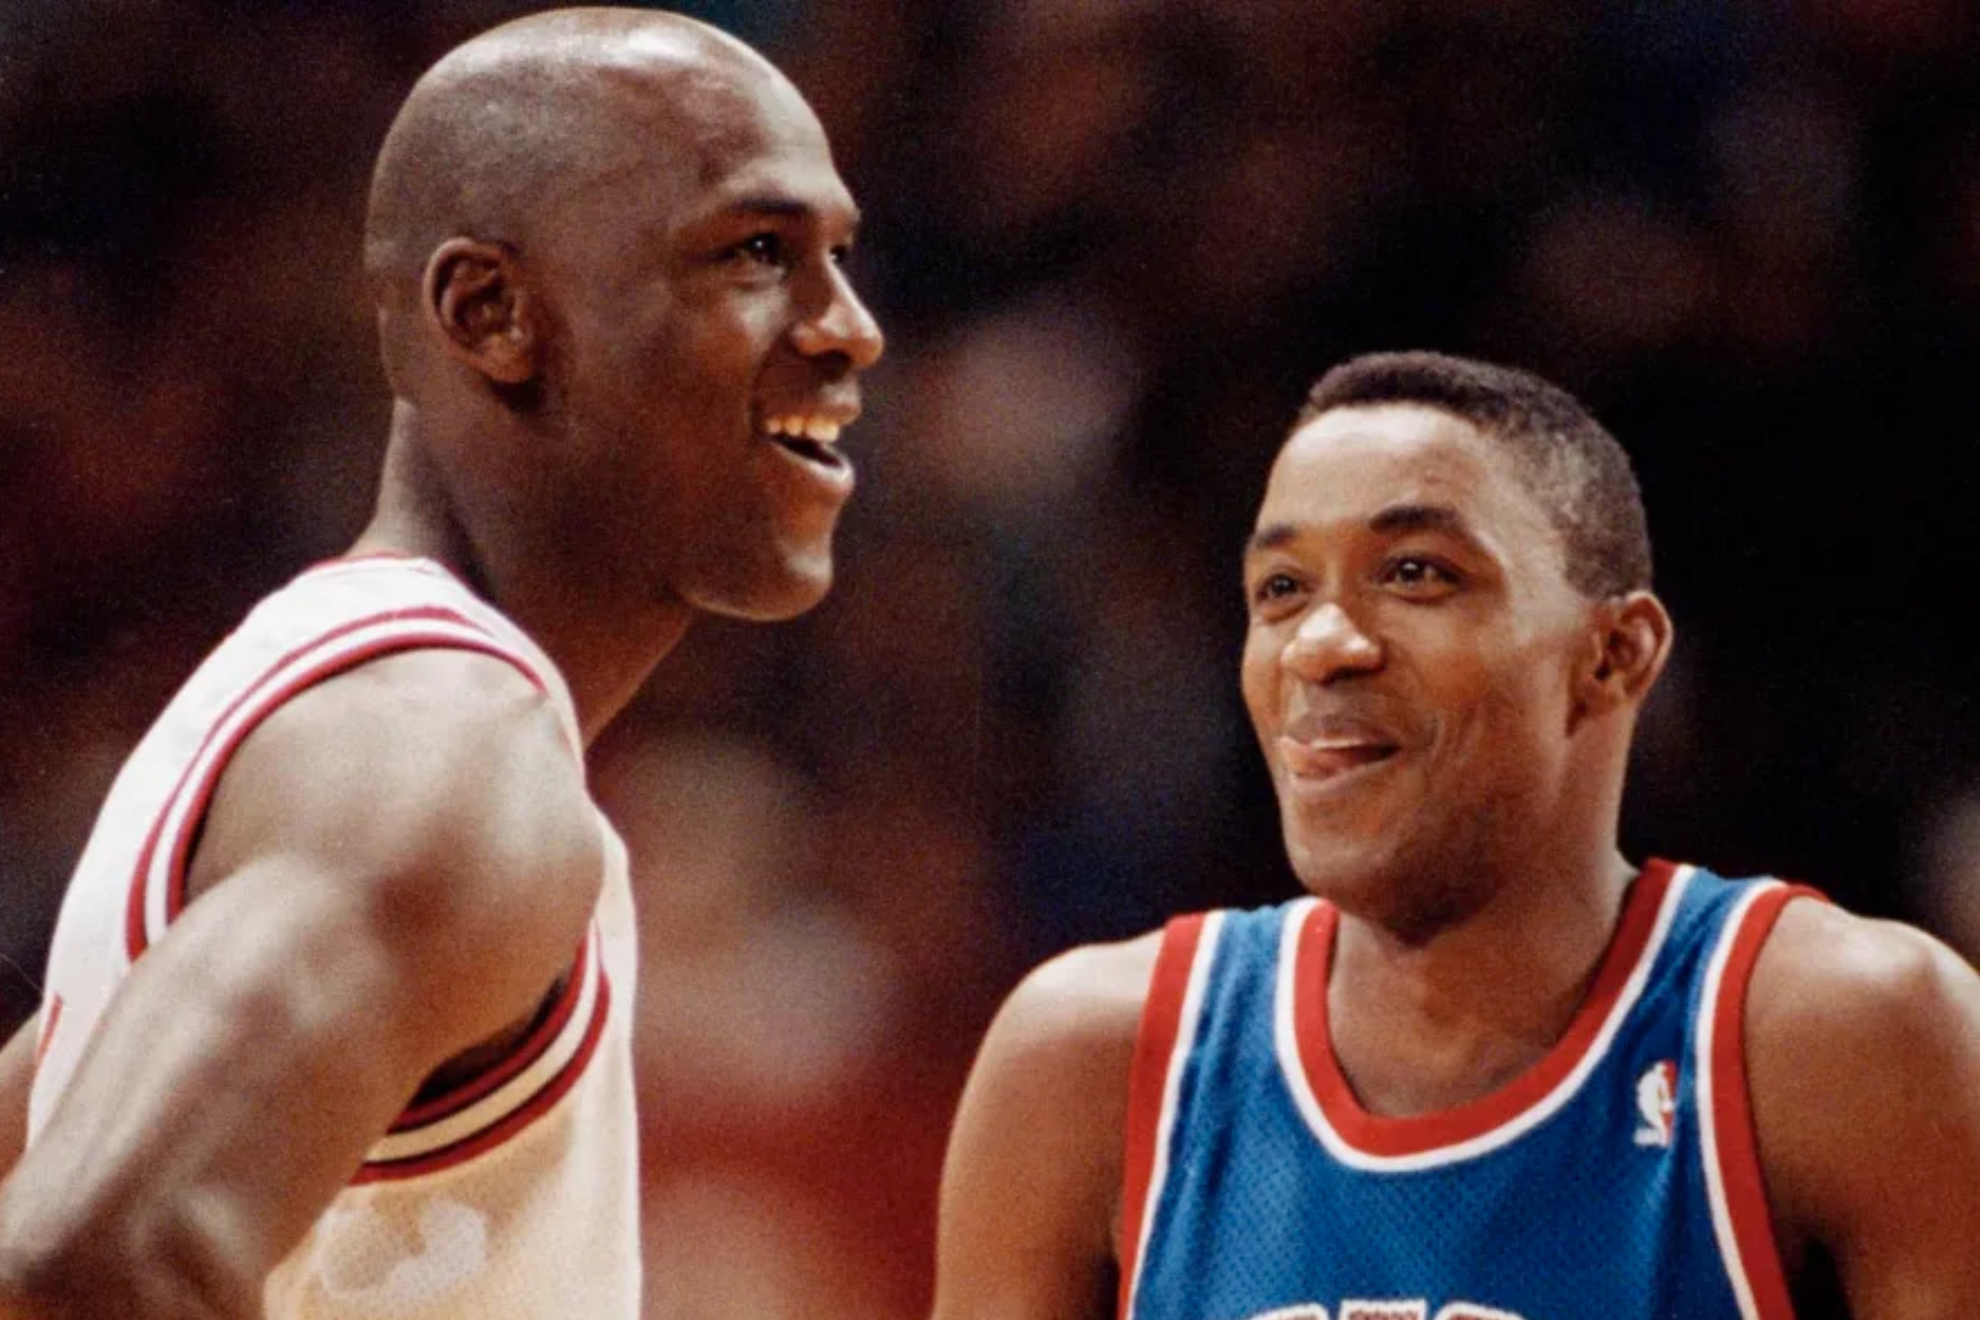 Isiah Thomas and Michael Jordan have been having a rift since the 1990's.